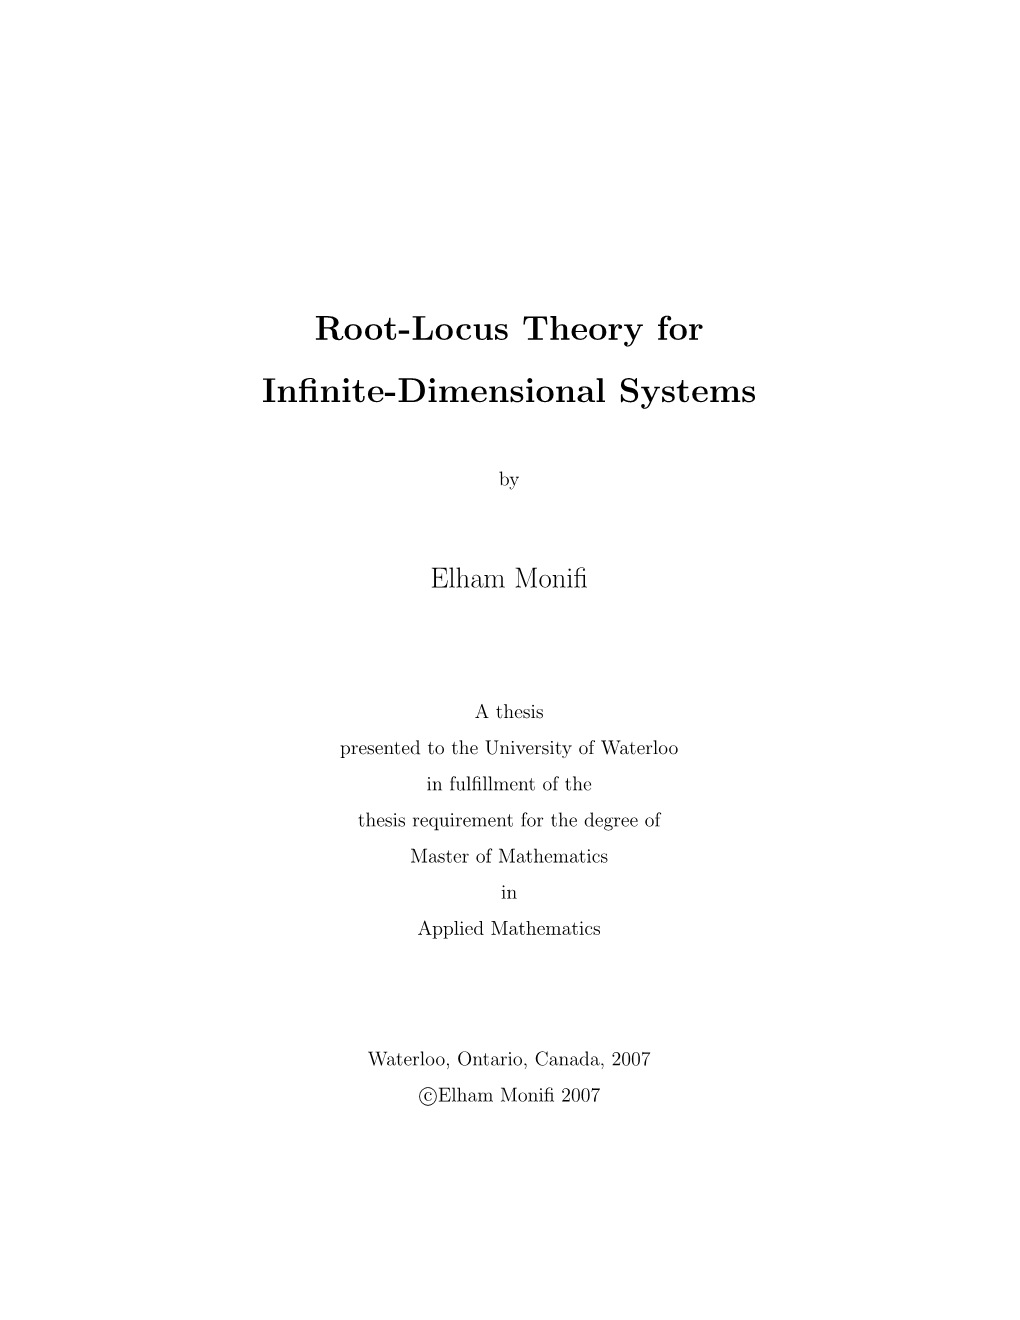 Root-Locus Theory for Infinite-Dimensional Systems